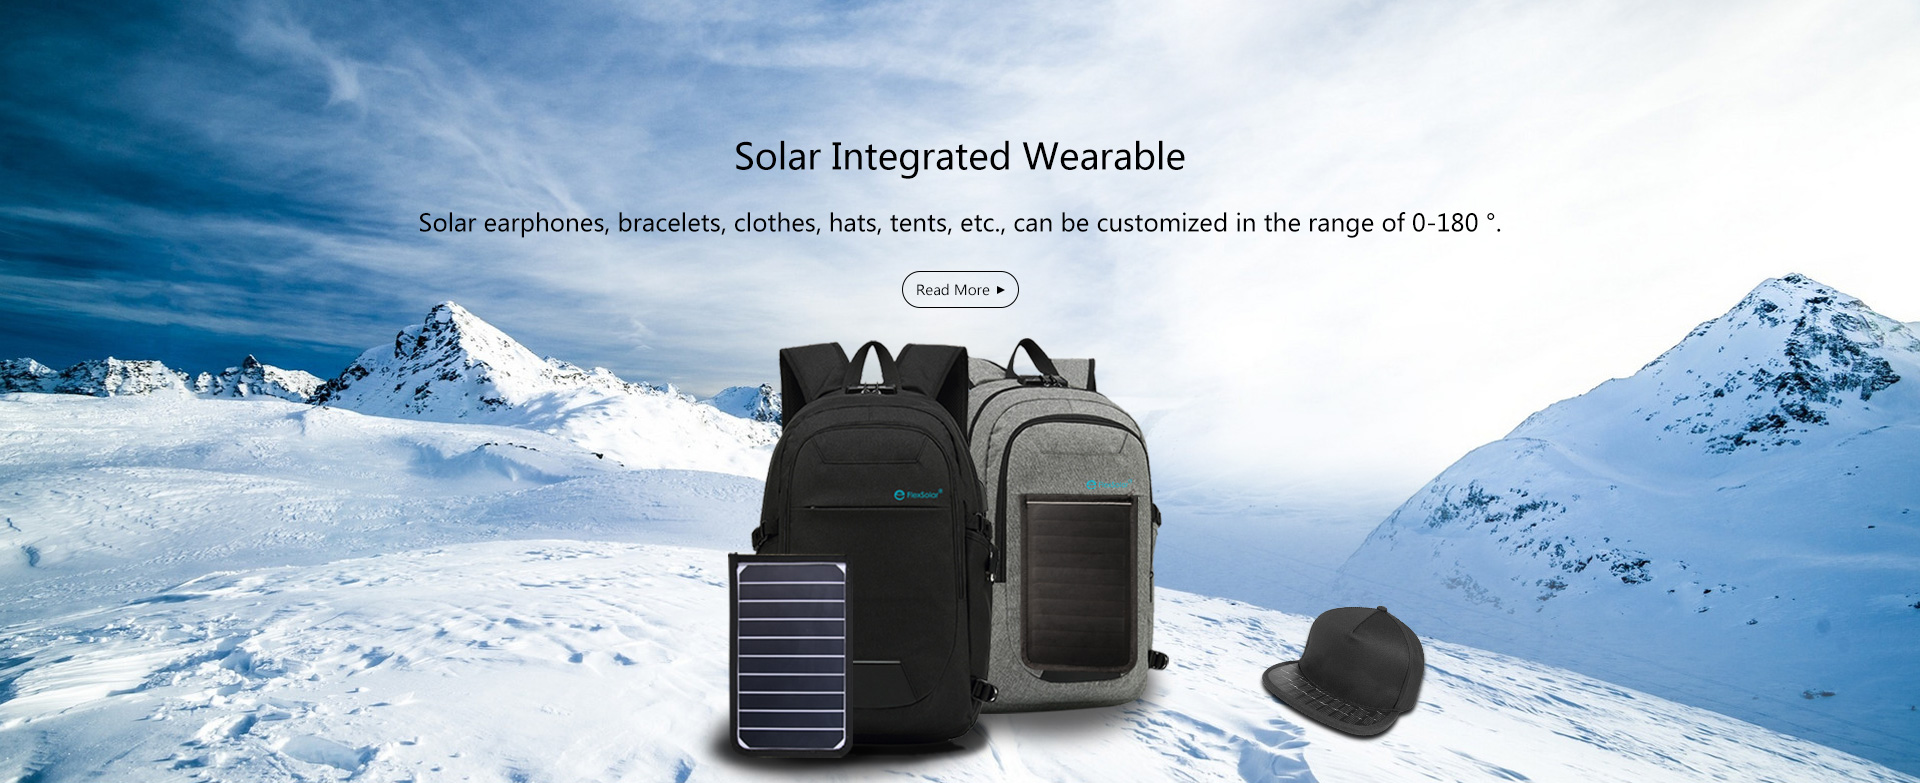 Solar Integrated Wearable